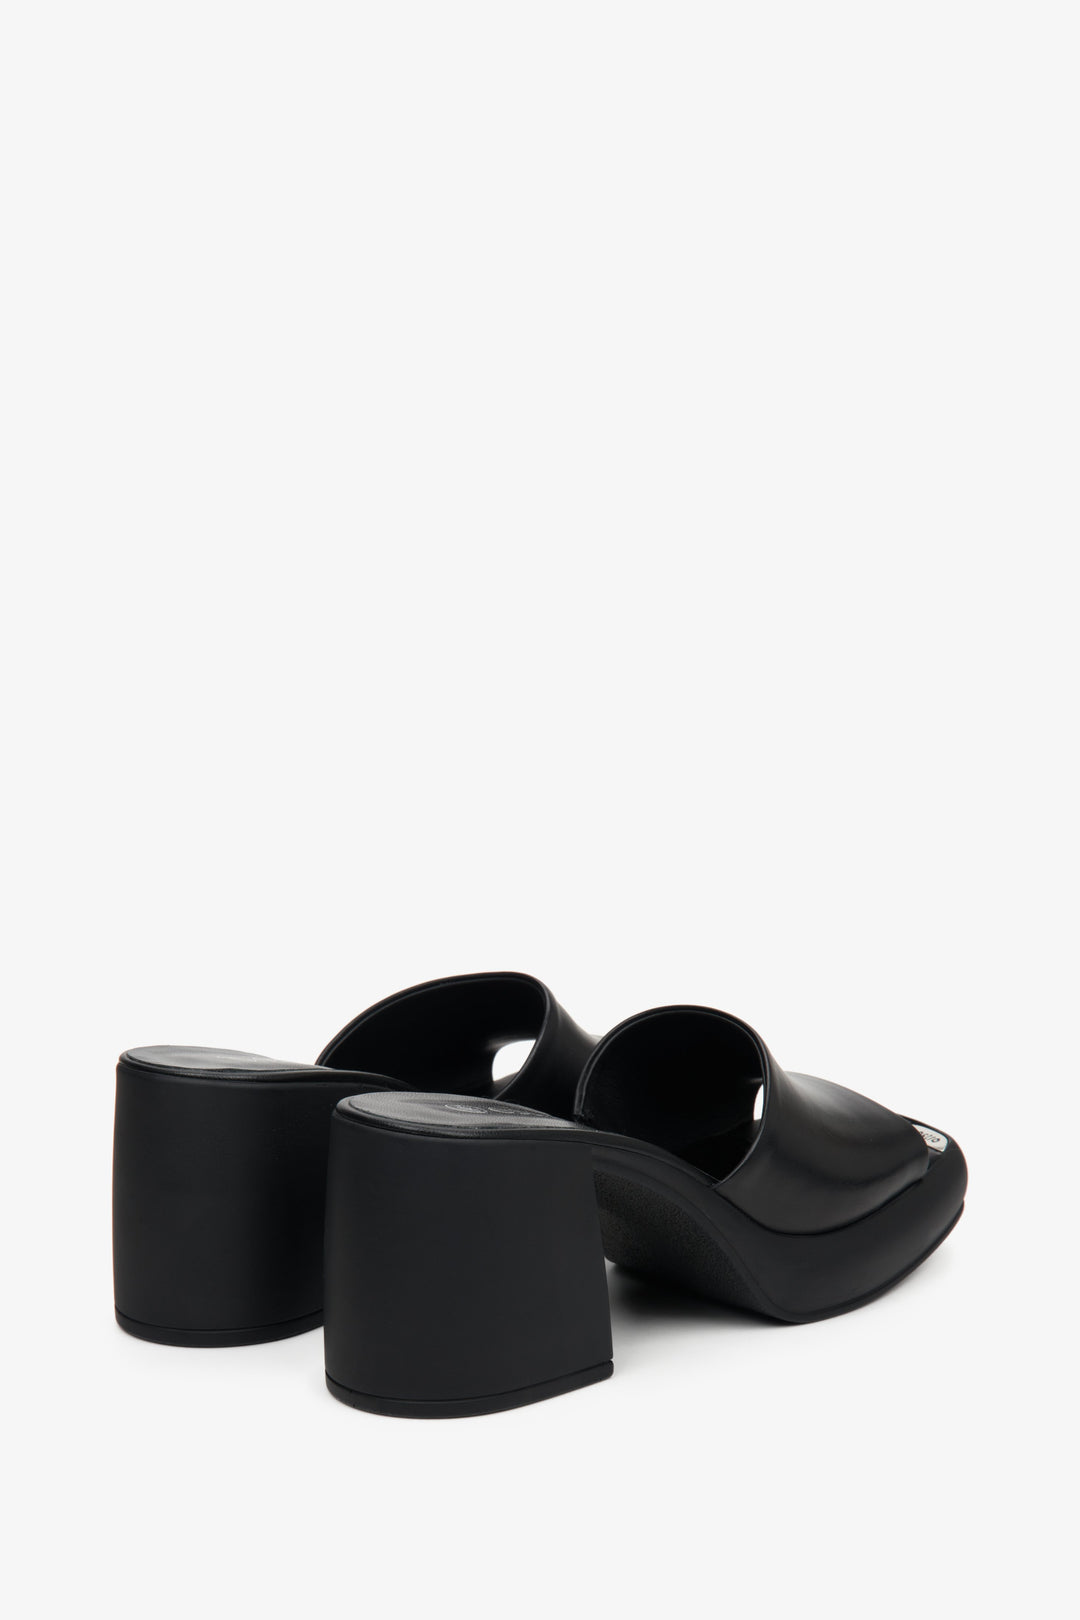 Women's black mules with a square heel - a close-up of the back of the shoes.